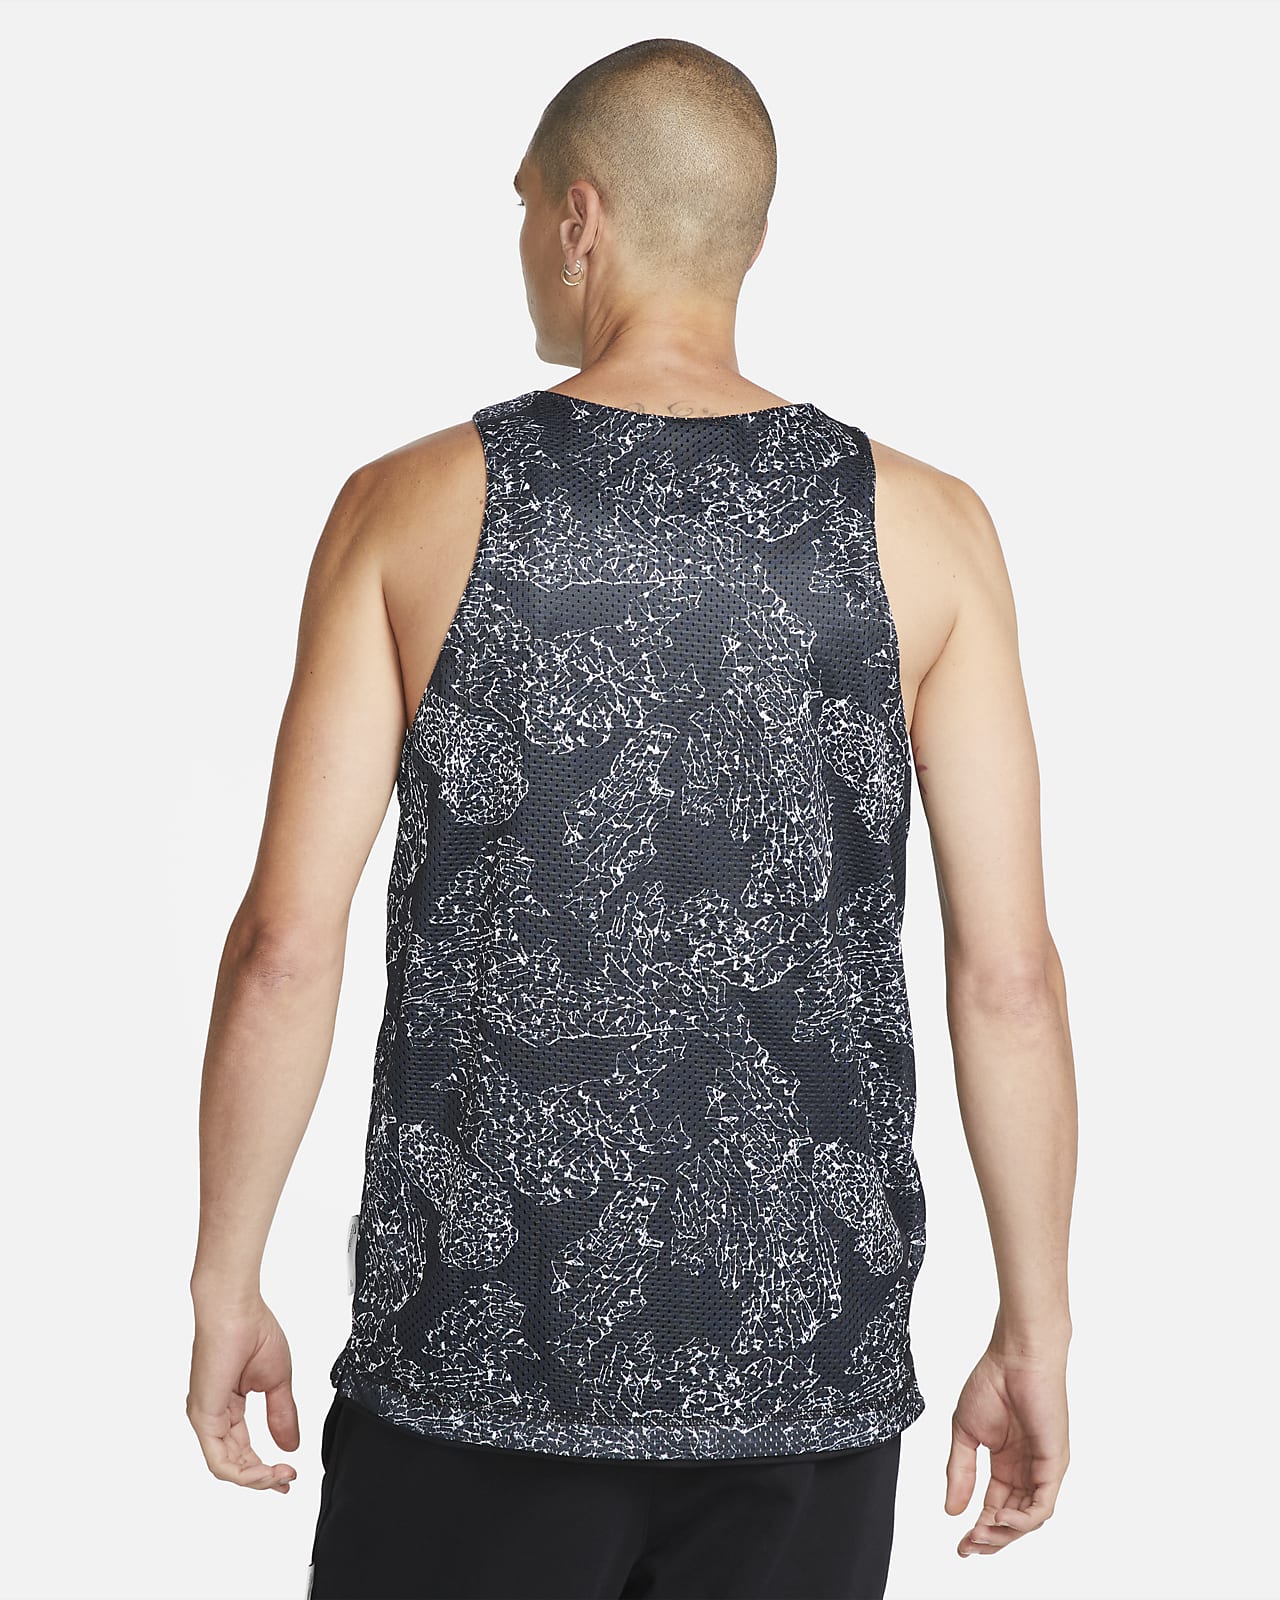 Black and White Printed Mesh Basketball Inspired Graphic -  New Zealand